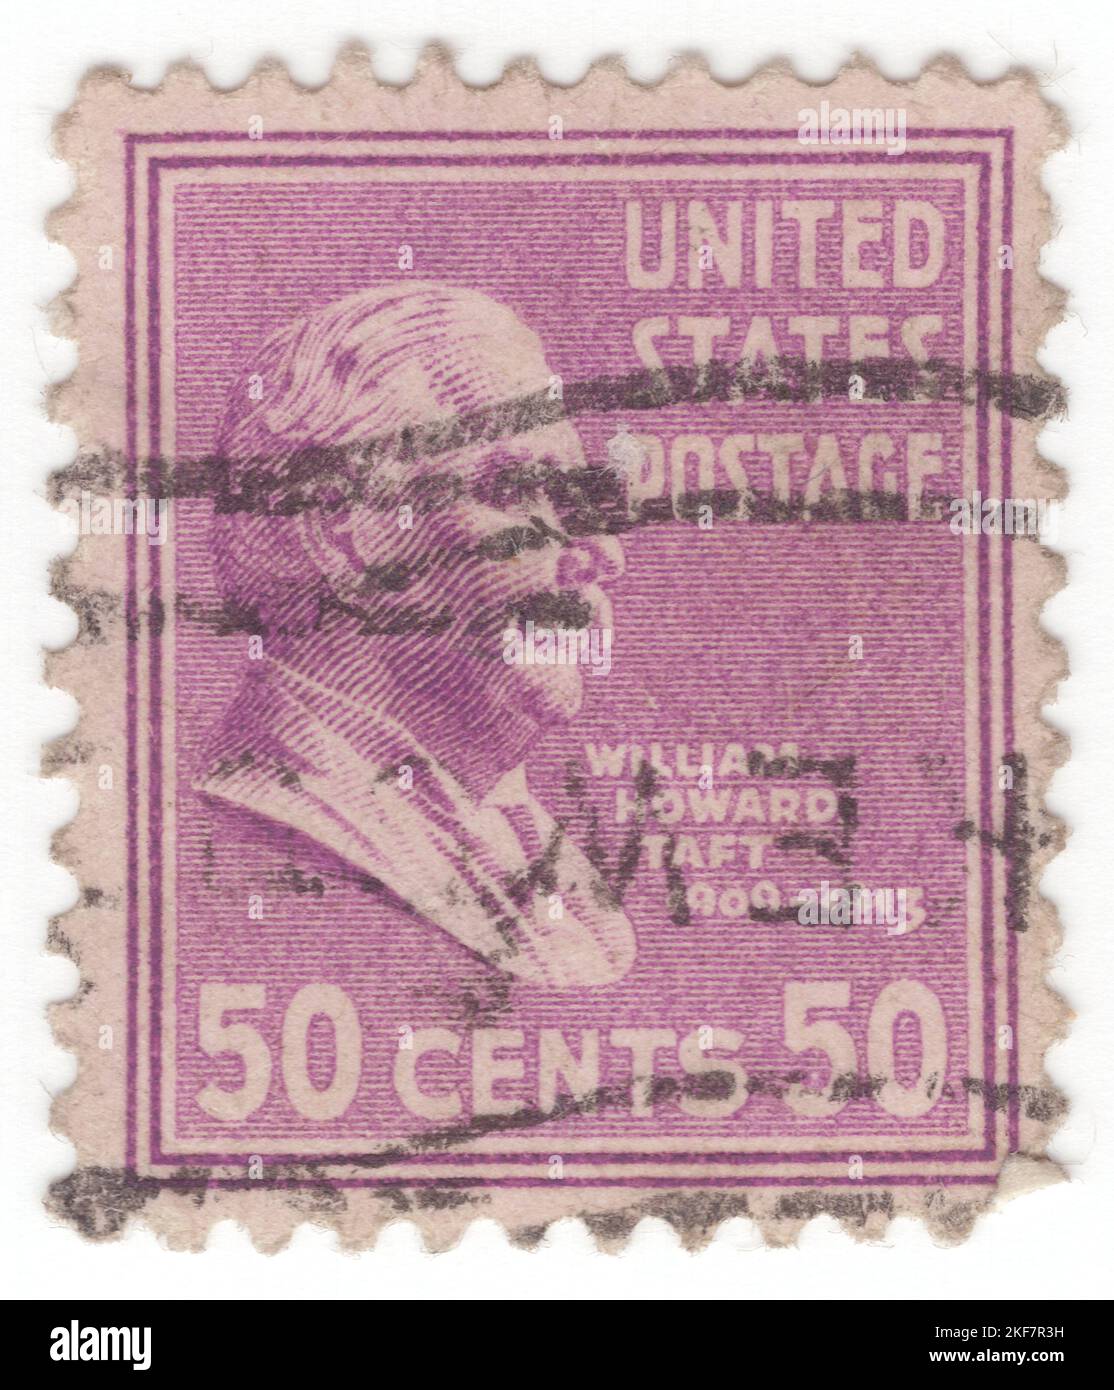 USA - 1938: An 50 cents light red-violet postage stamp depicting portrait of William Howard Taft. 27th president of the United States (1909–1913) and the tenth chief justice of the United States (1921–1930), the only person to have held both offices. Taft was elected president in 1908, the chosen successor of Theodore Roosevelt, but was defeated for reelection in 1912 by Woodrow Wilson after Roosevelt split the Republican vote by running as a third-party candidate. In 1921, President Warren G. Harding appointed Taft to be chief justice, a position he held until a month before his death Stock Photo